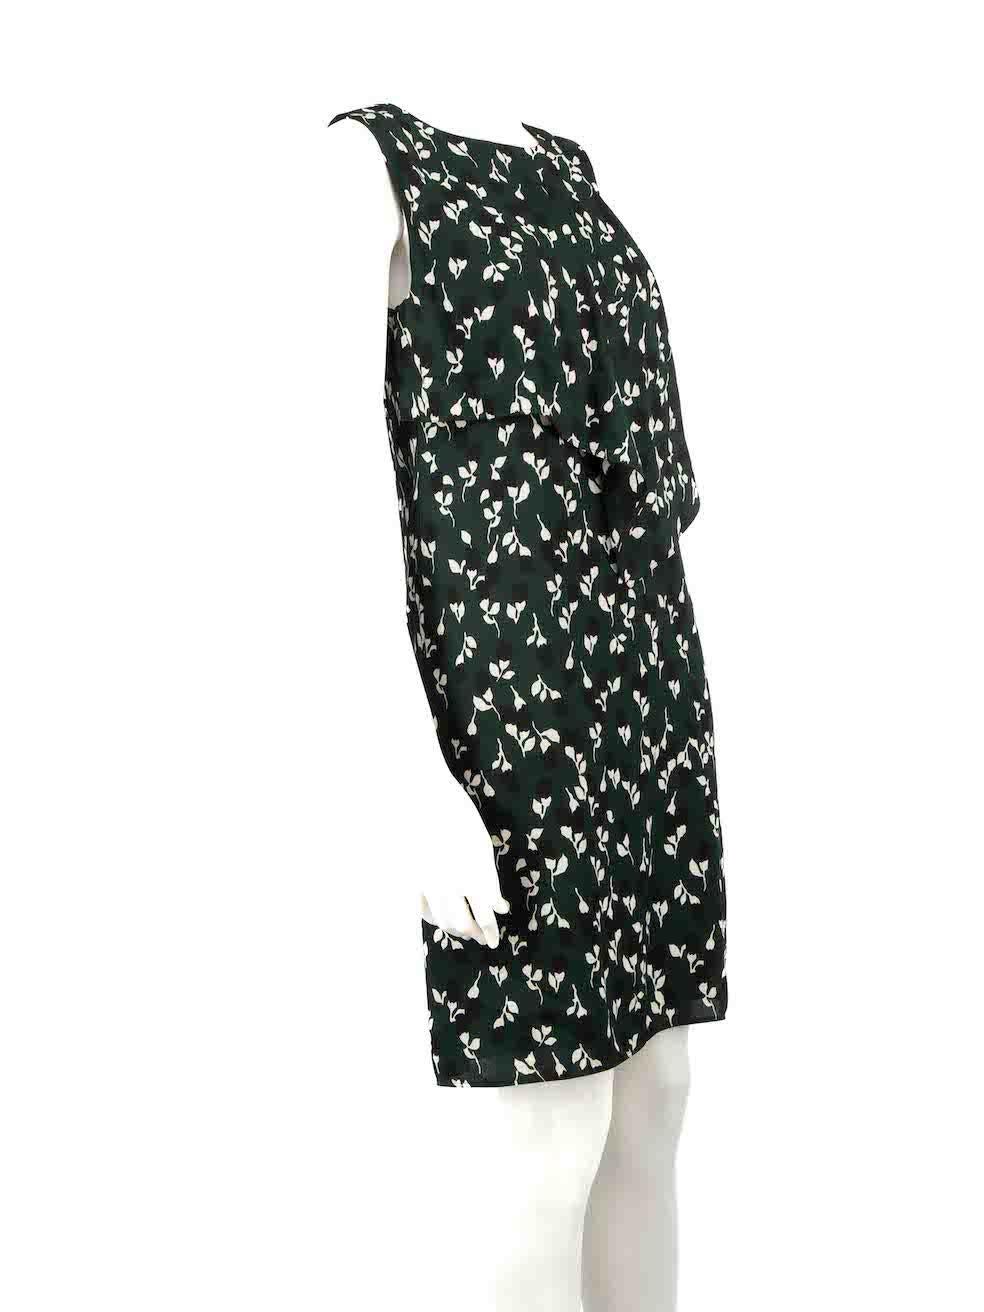 CONDITION is Very good. Hardly any visible wear to dress is evident on this used Marni designer resale item.
 
 
 
 Details
 
 
 Green
 
 Viscose
 
 Dress
 
 Floral pattern
 
 Sleeveless
 
 Round neckline
 
 Front draped detail
 
 Knee length
 
